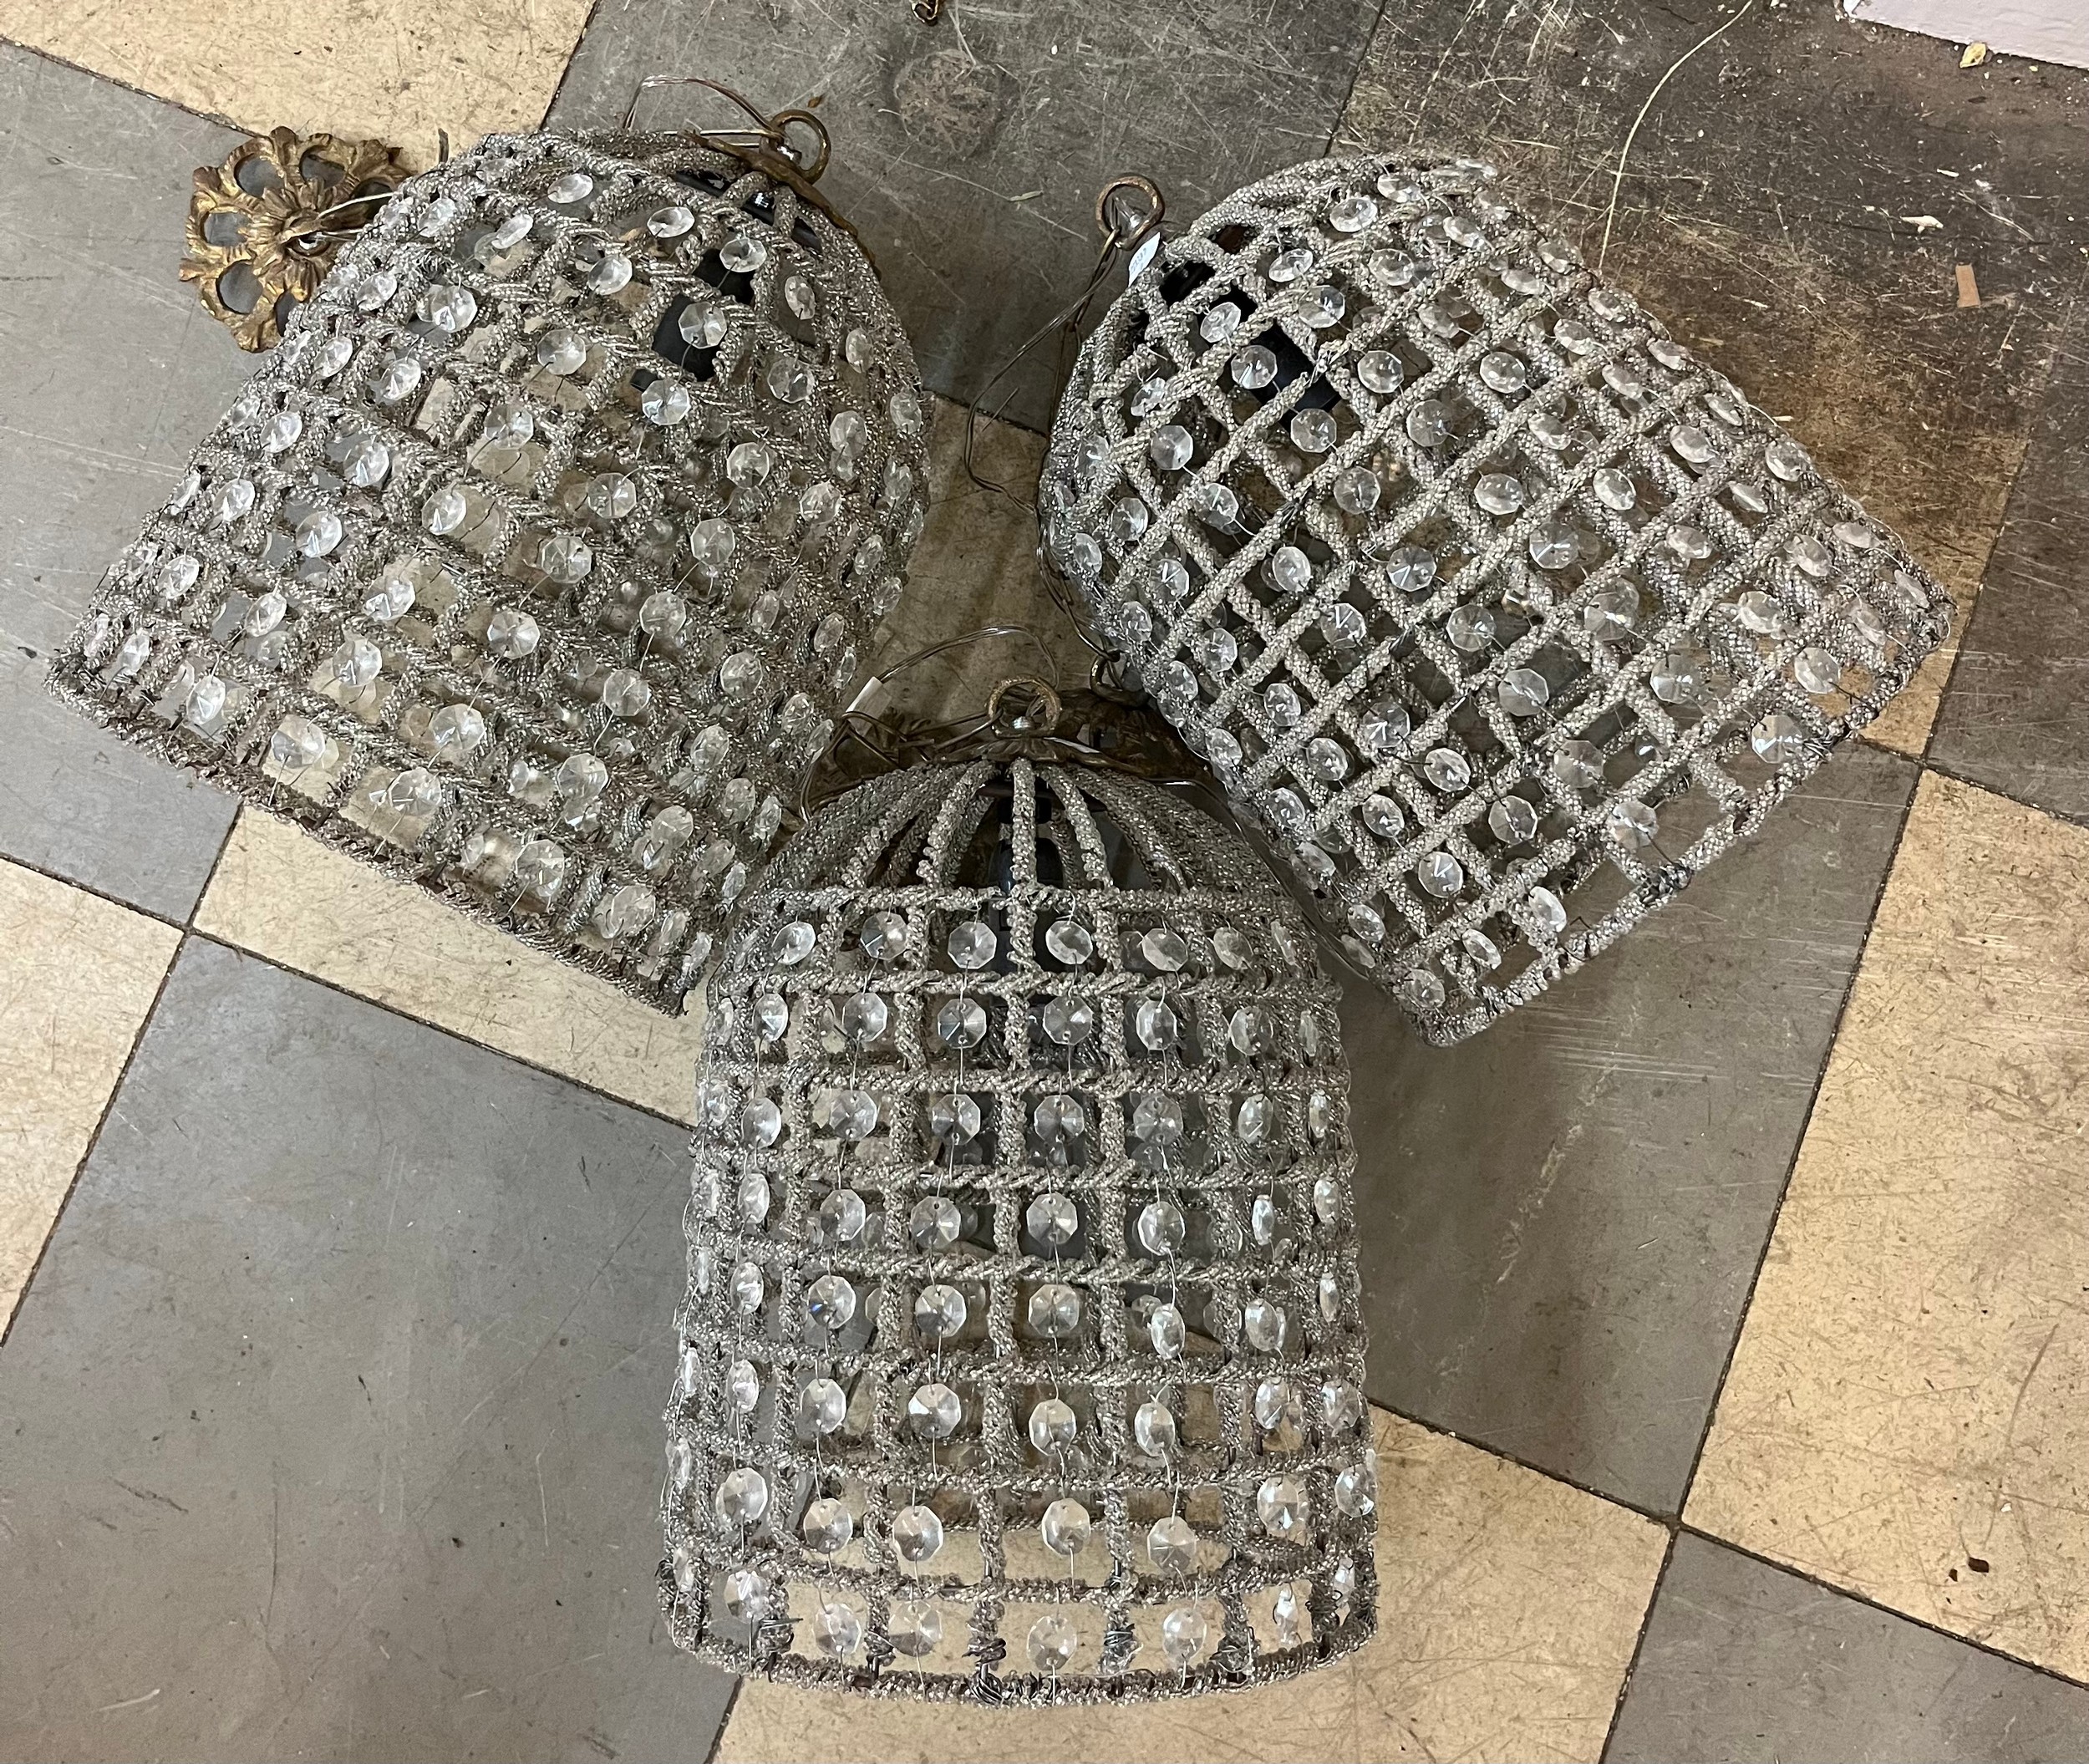 A set of three French Empire style bell shaped chandeliers